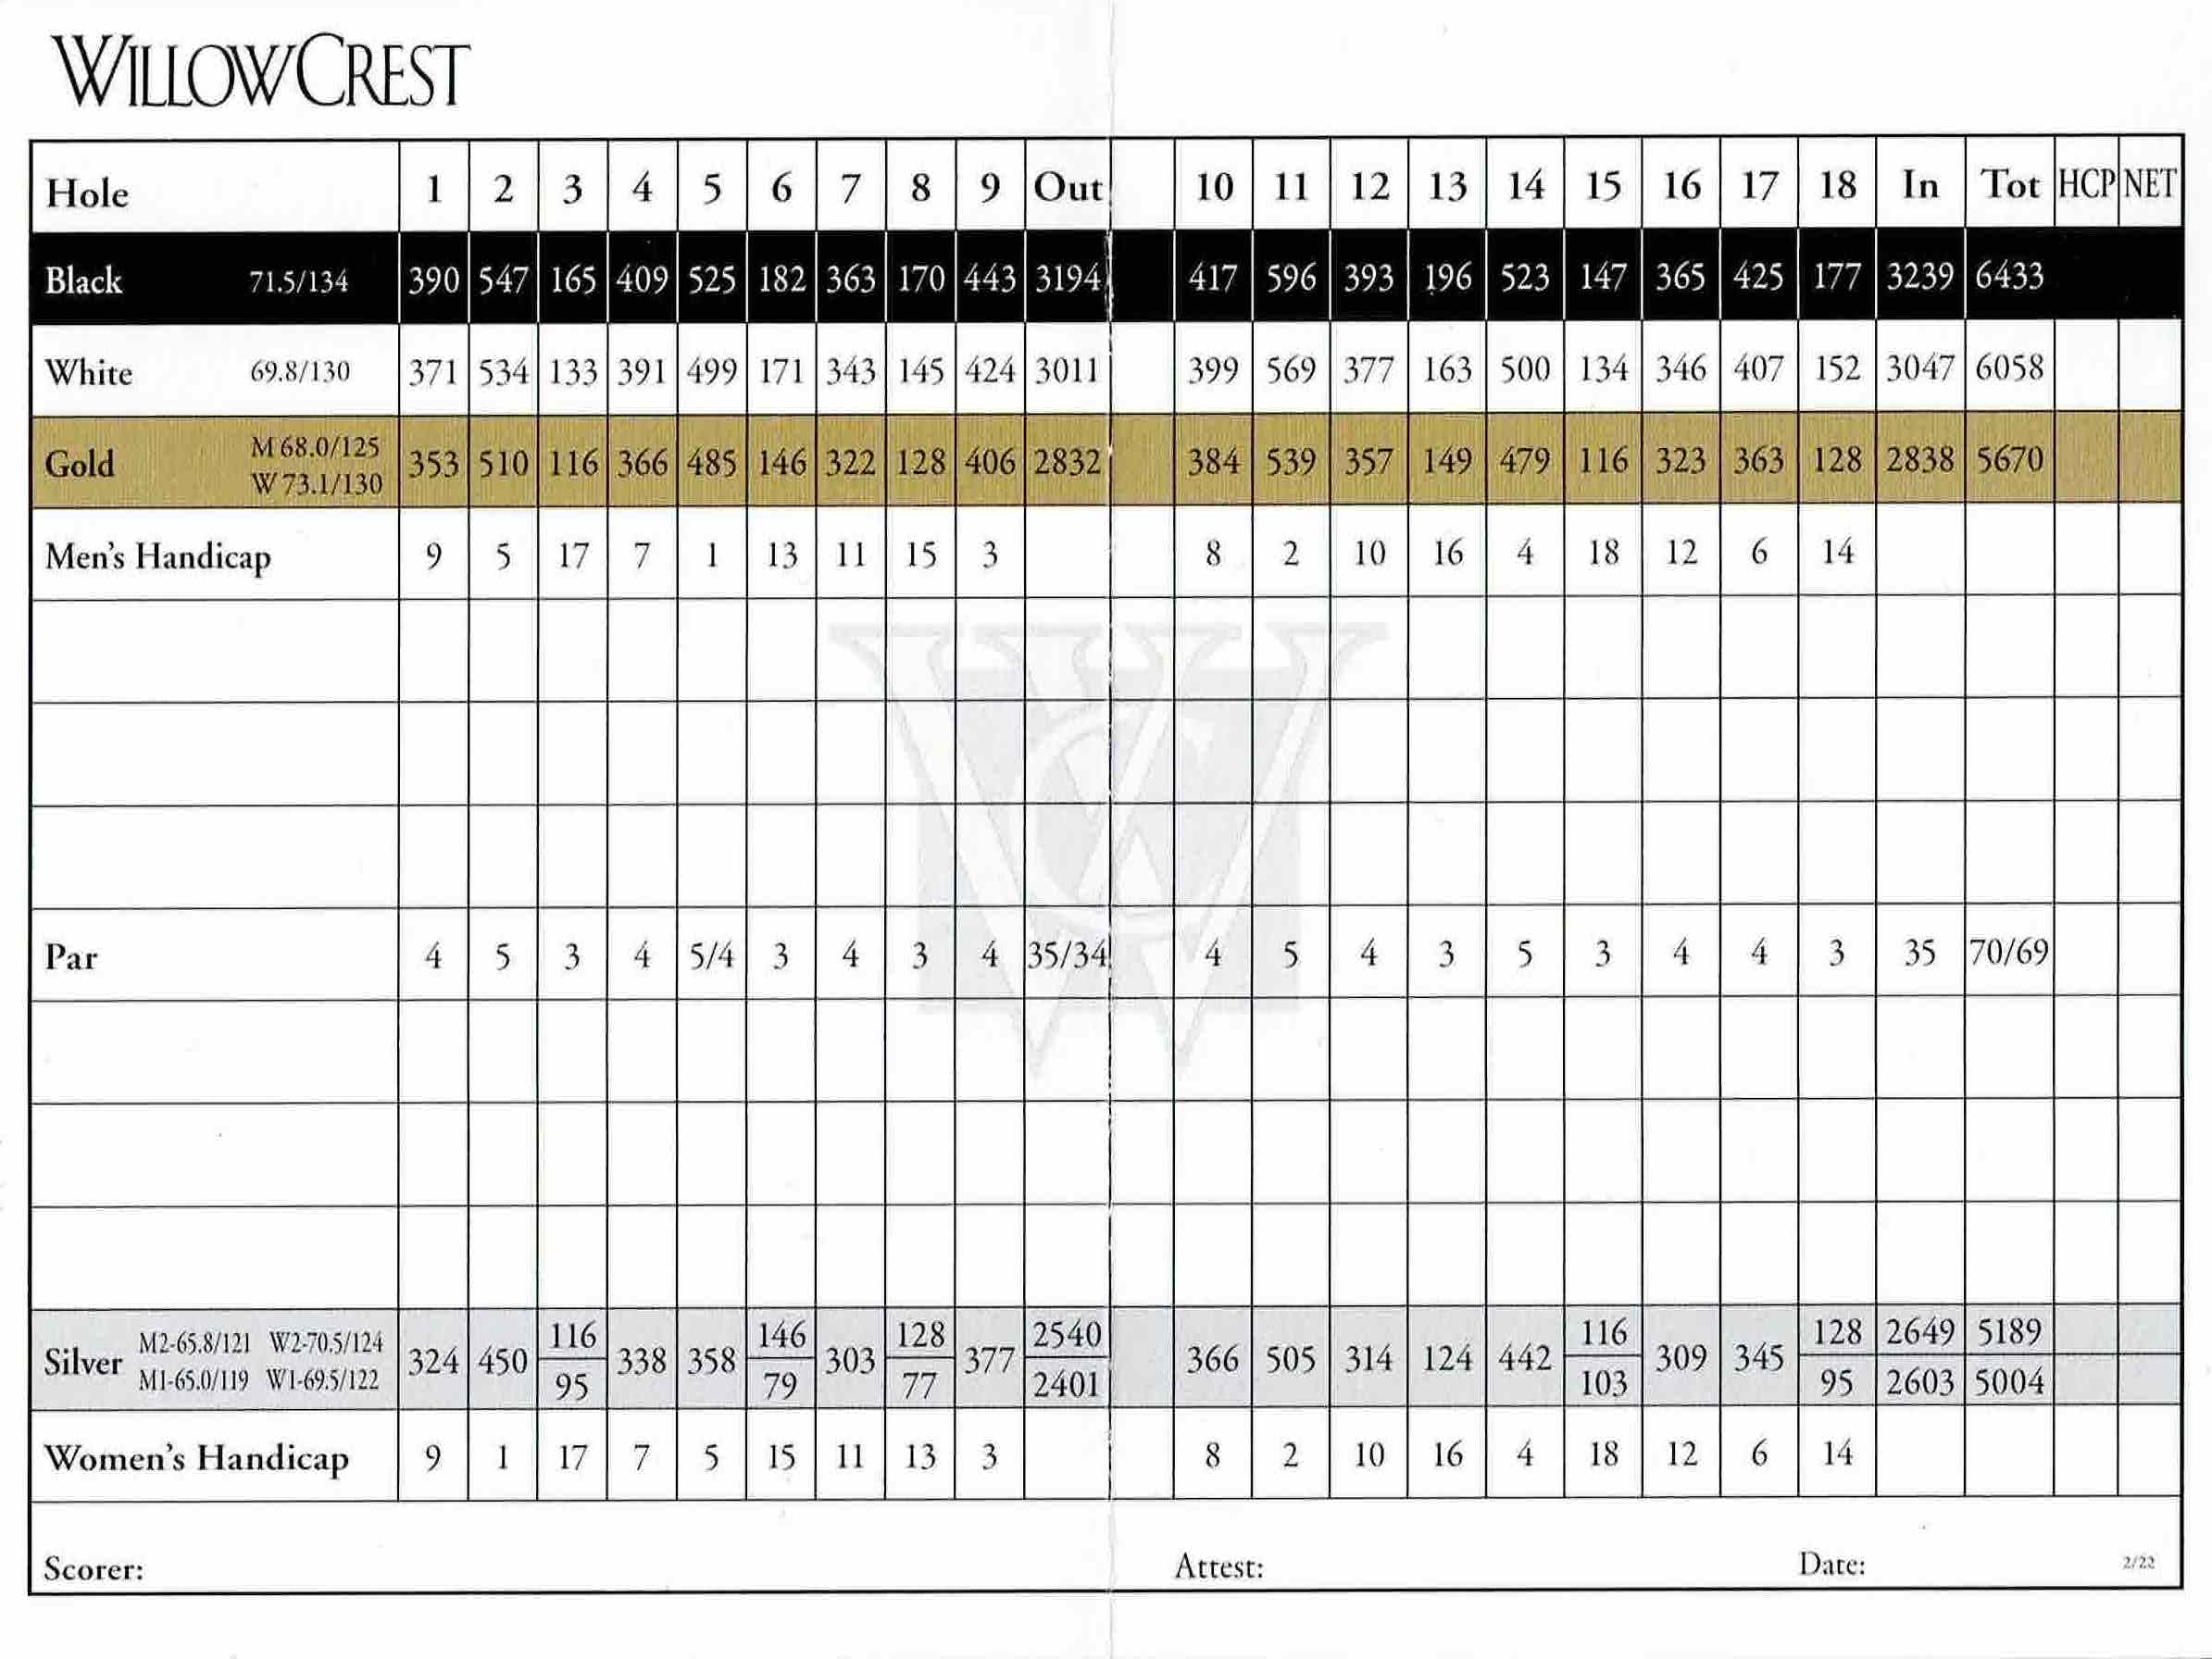 Scan of the scorecard from Willow Crest Golf Club in Oak Brook, Illinois. 